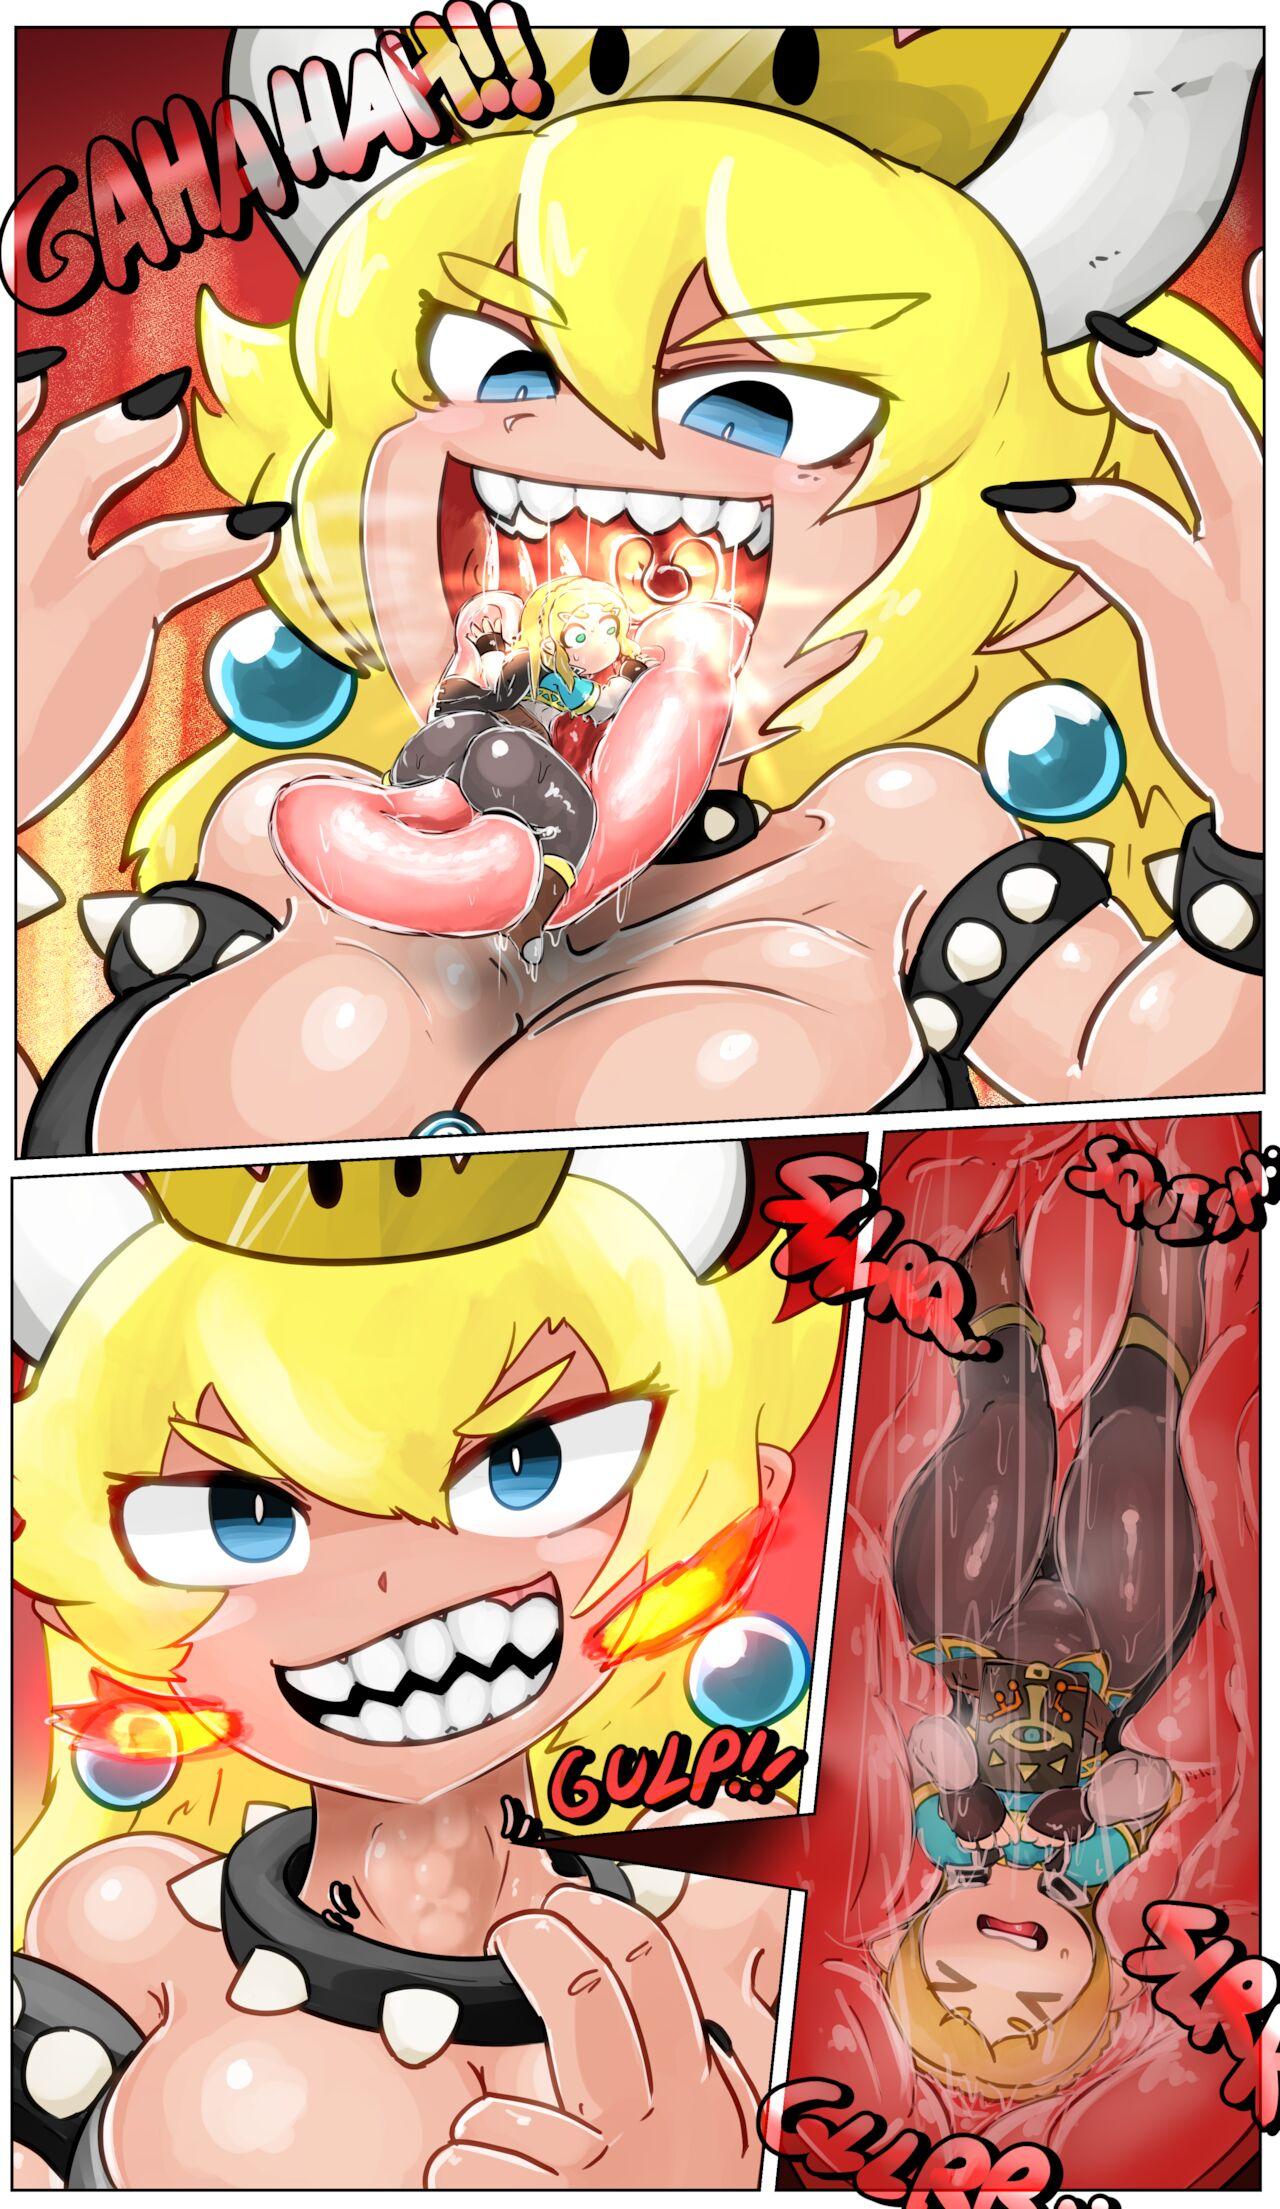 Freeporn Bowsette Inside Story - The legend of zelda Super mario brothers | super mario bros. Gay Amateur - Page 2